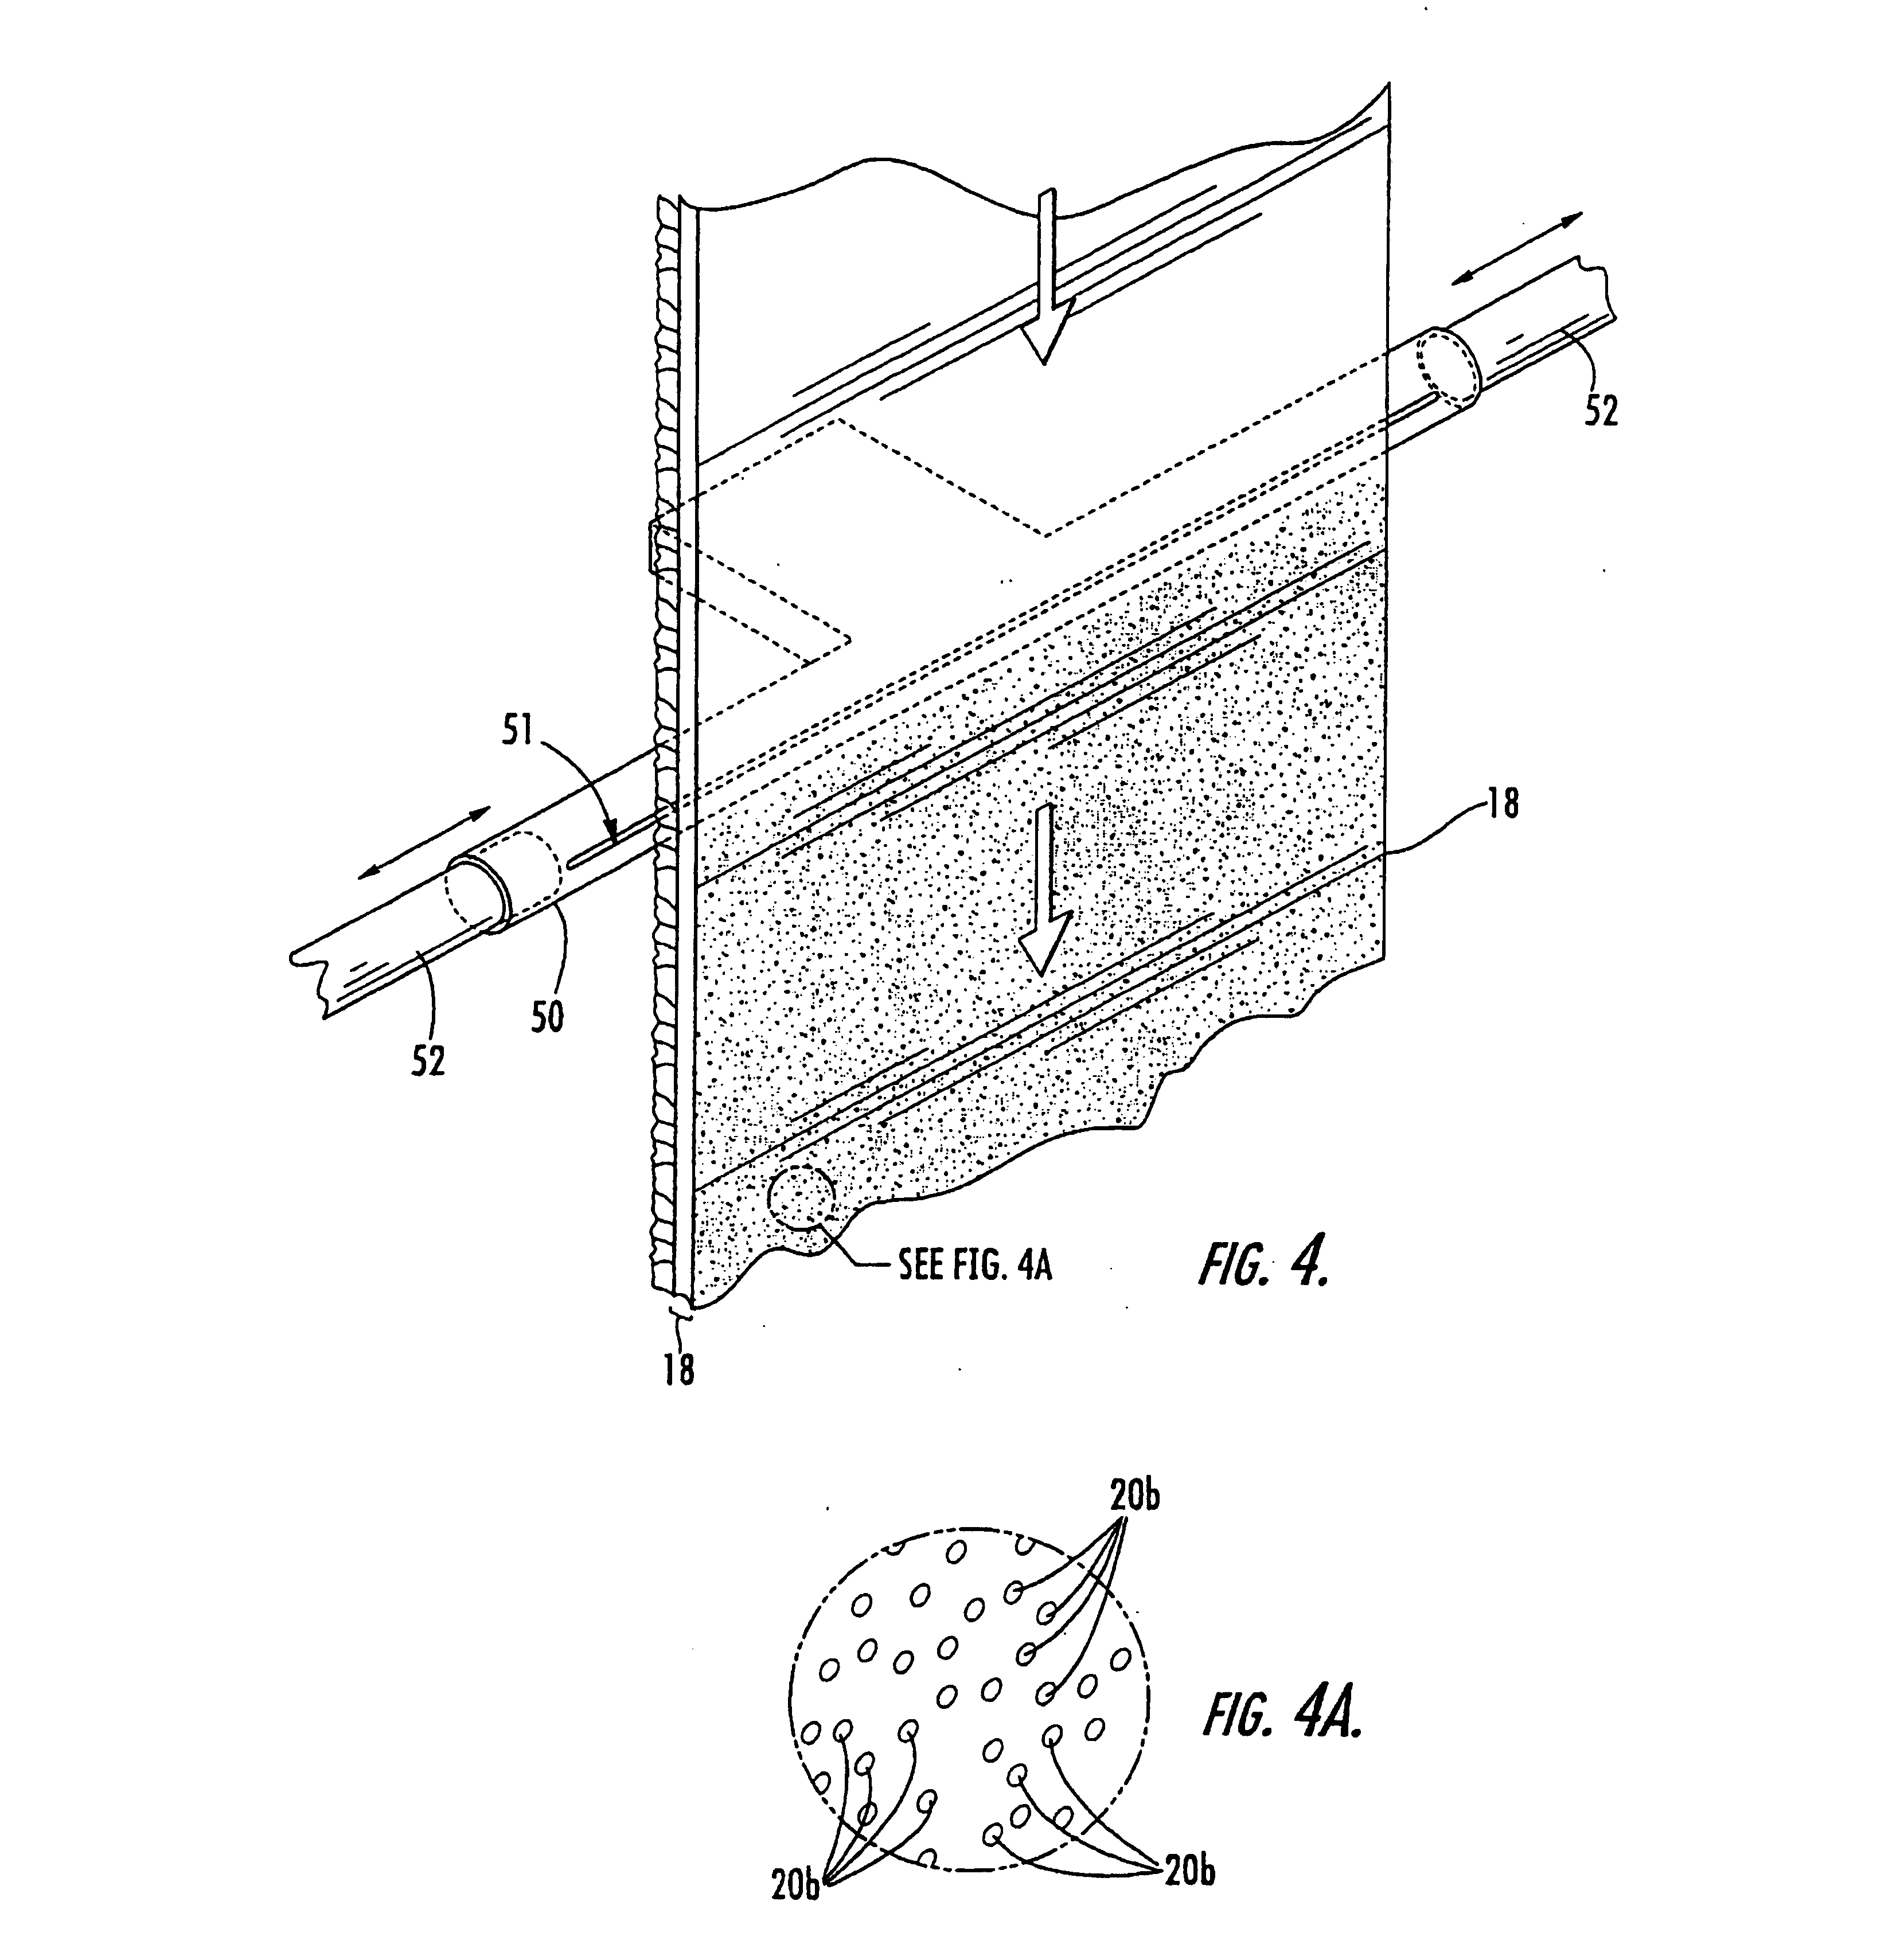 Sound absorptive multilayer articles and methods of producing same